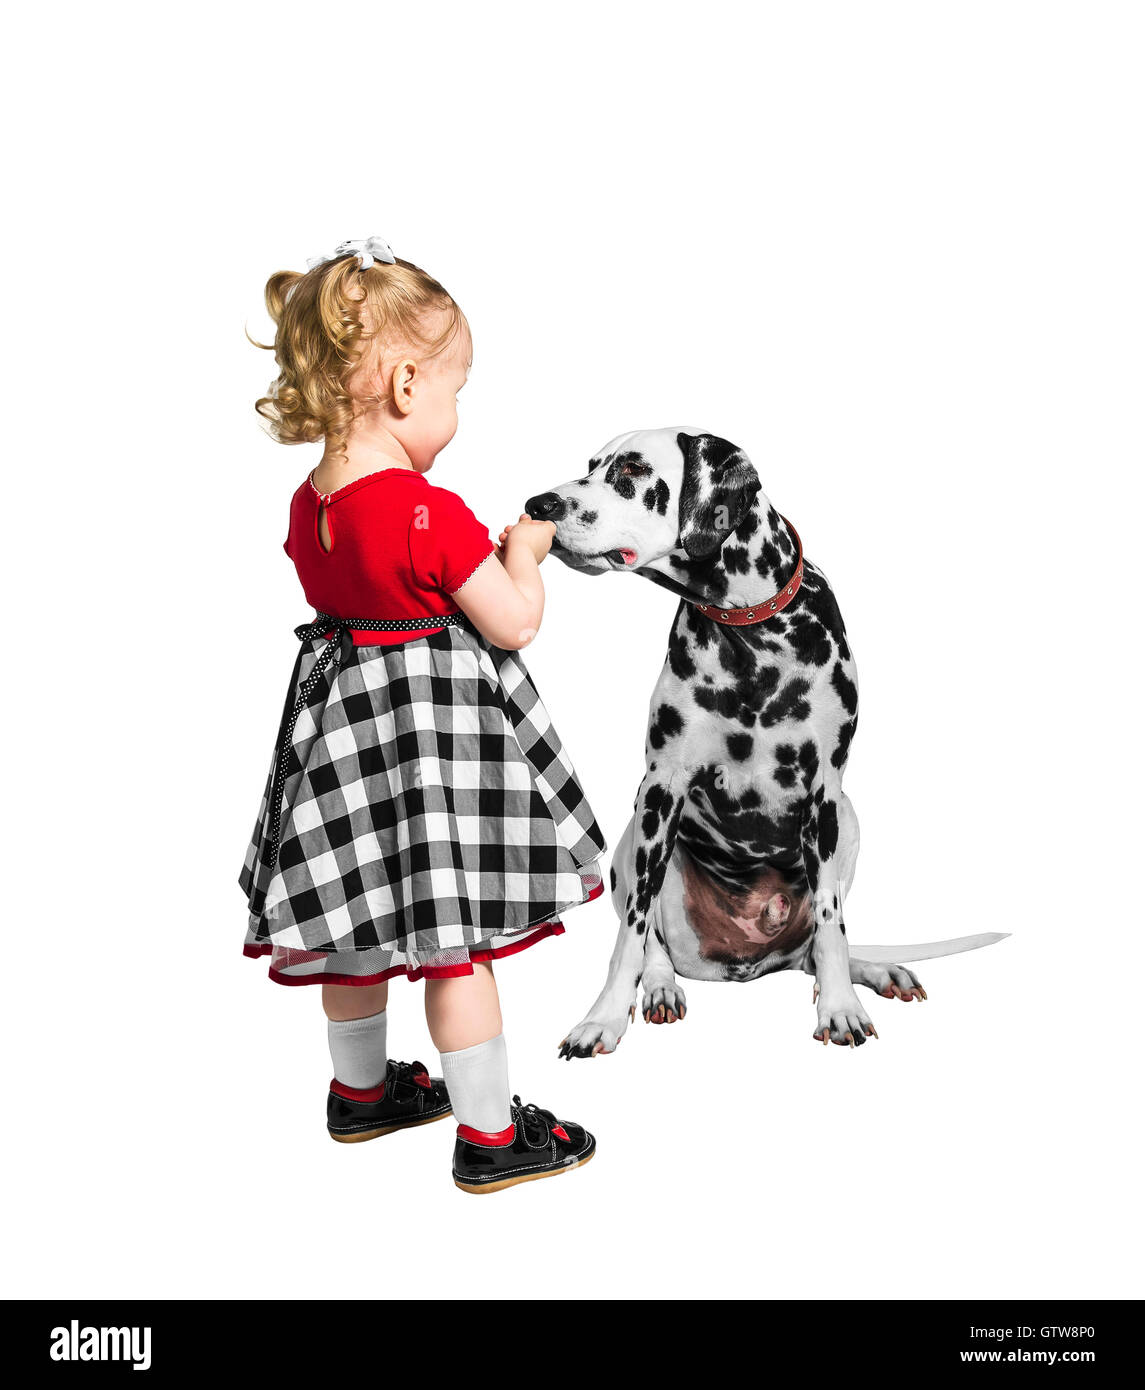 Little girl gives something Dalmatian dog and he sniffs Stock Photo